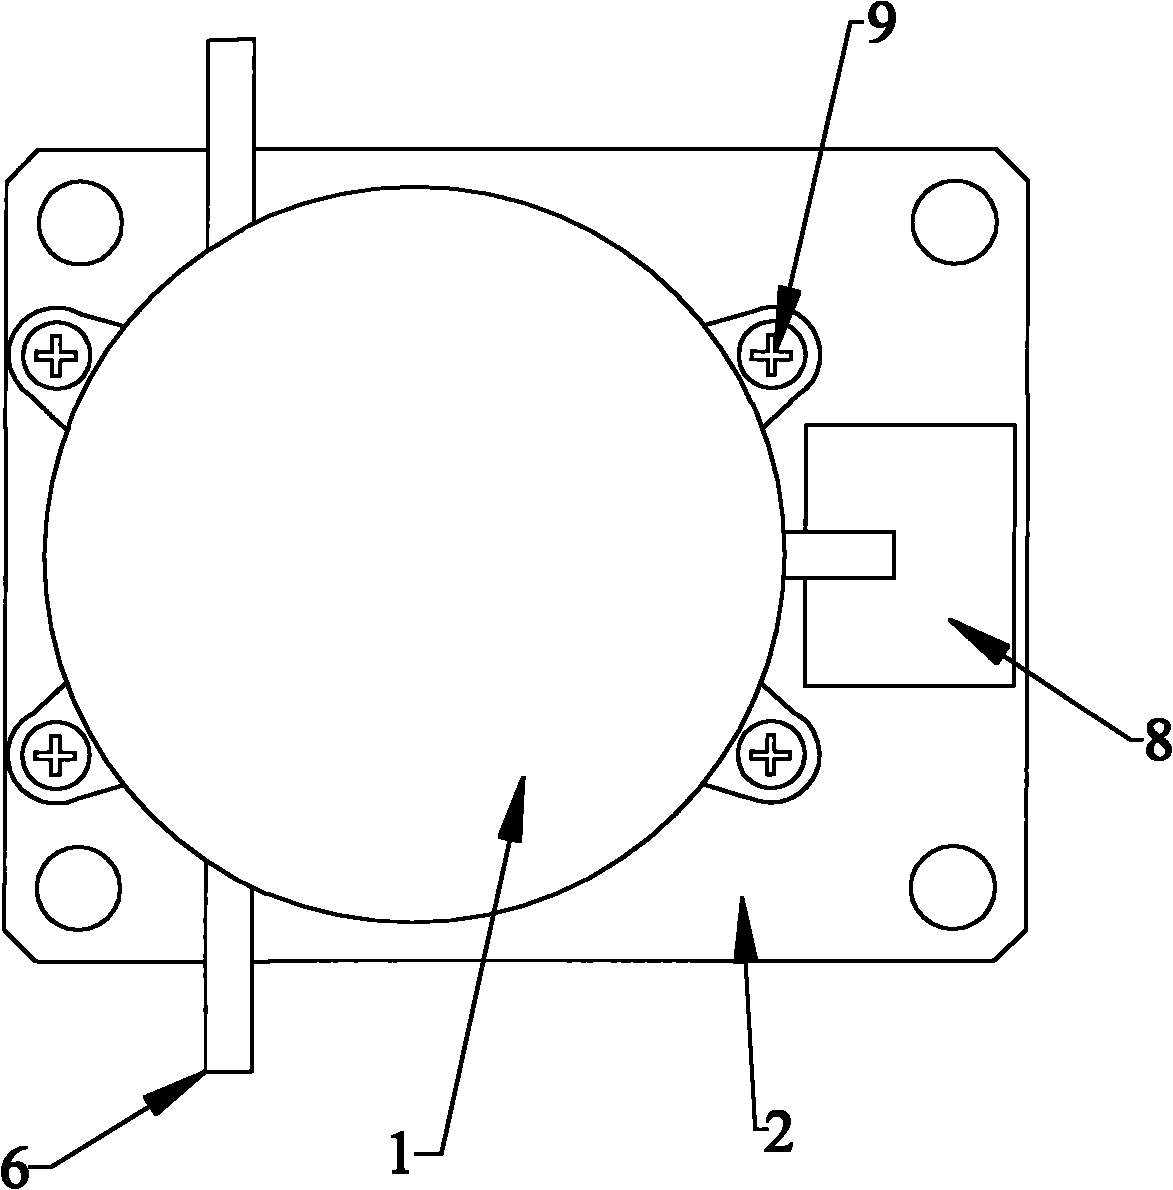 Encapsulation structure of microwave isolator